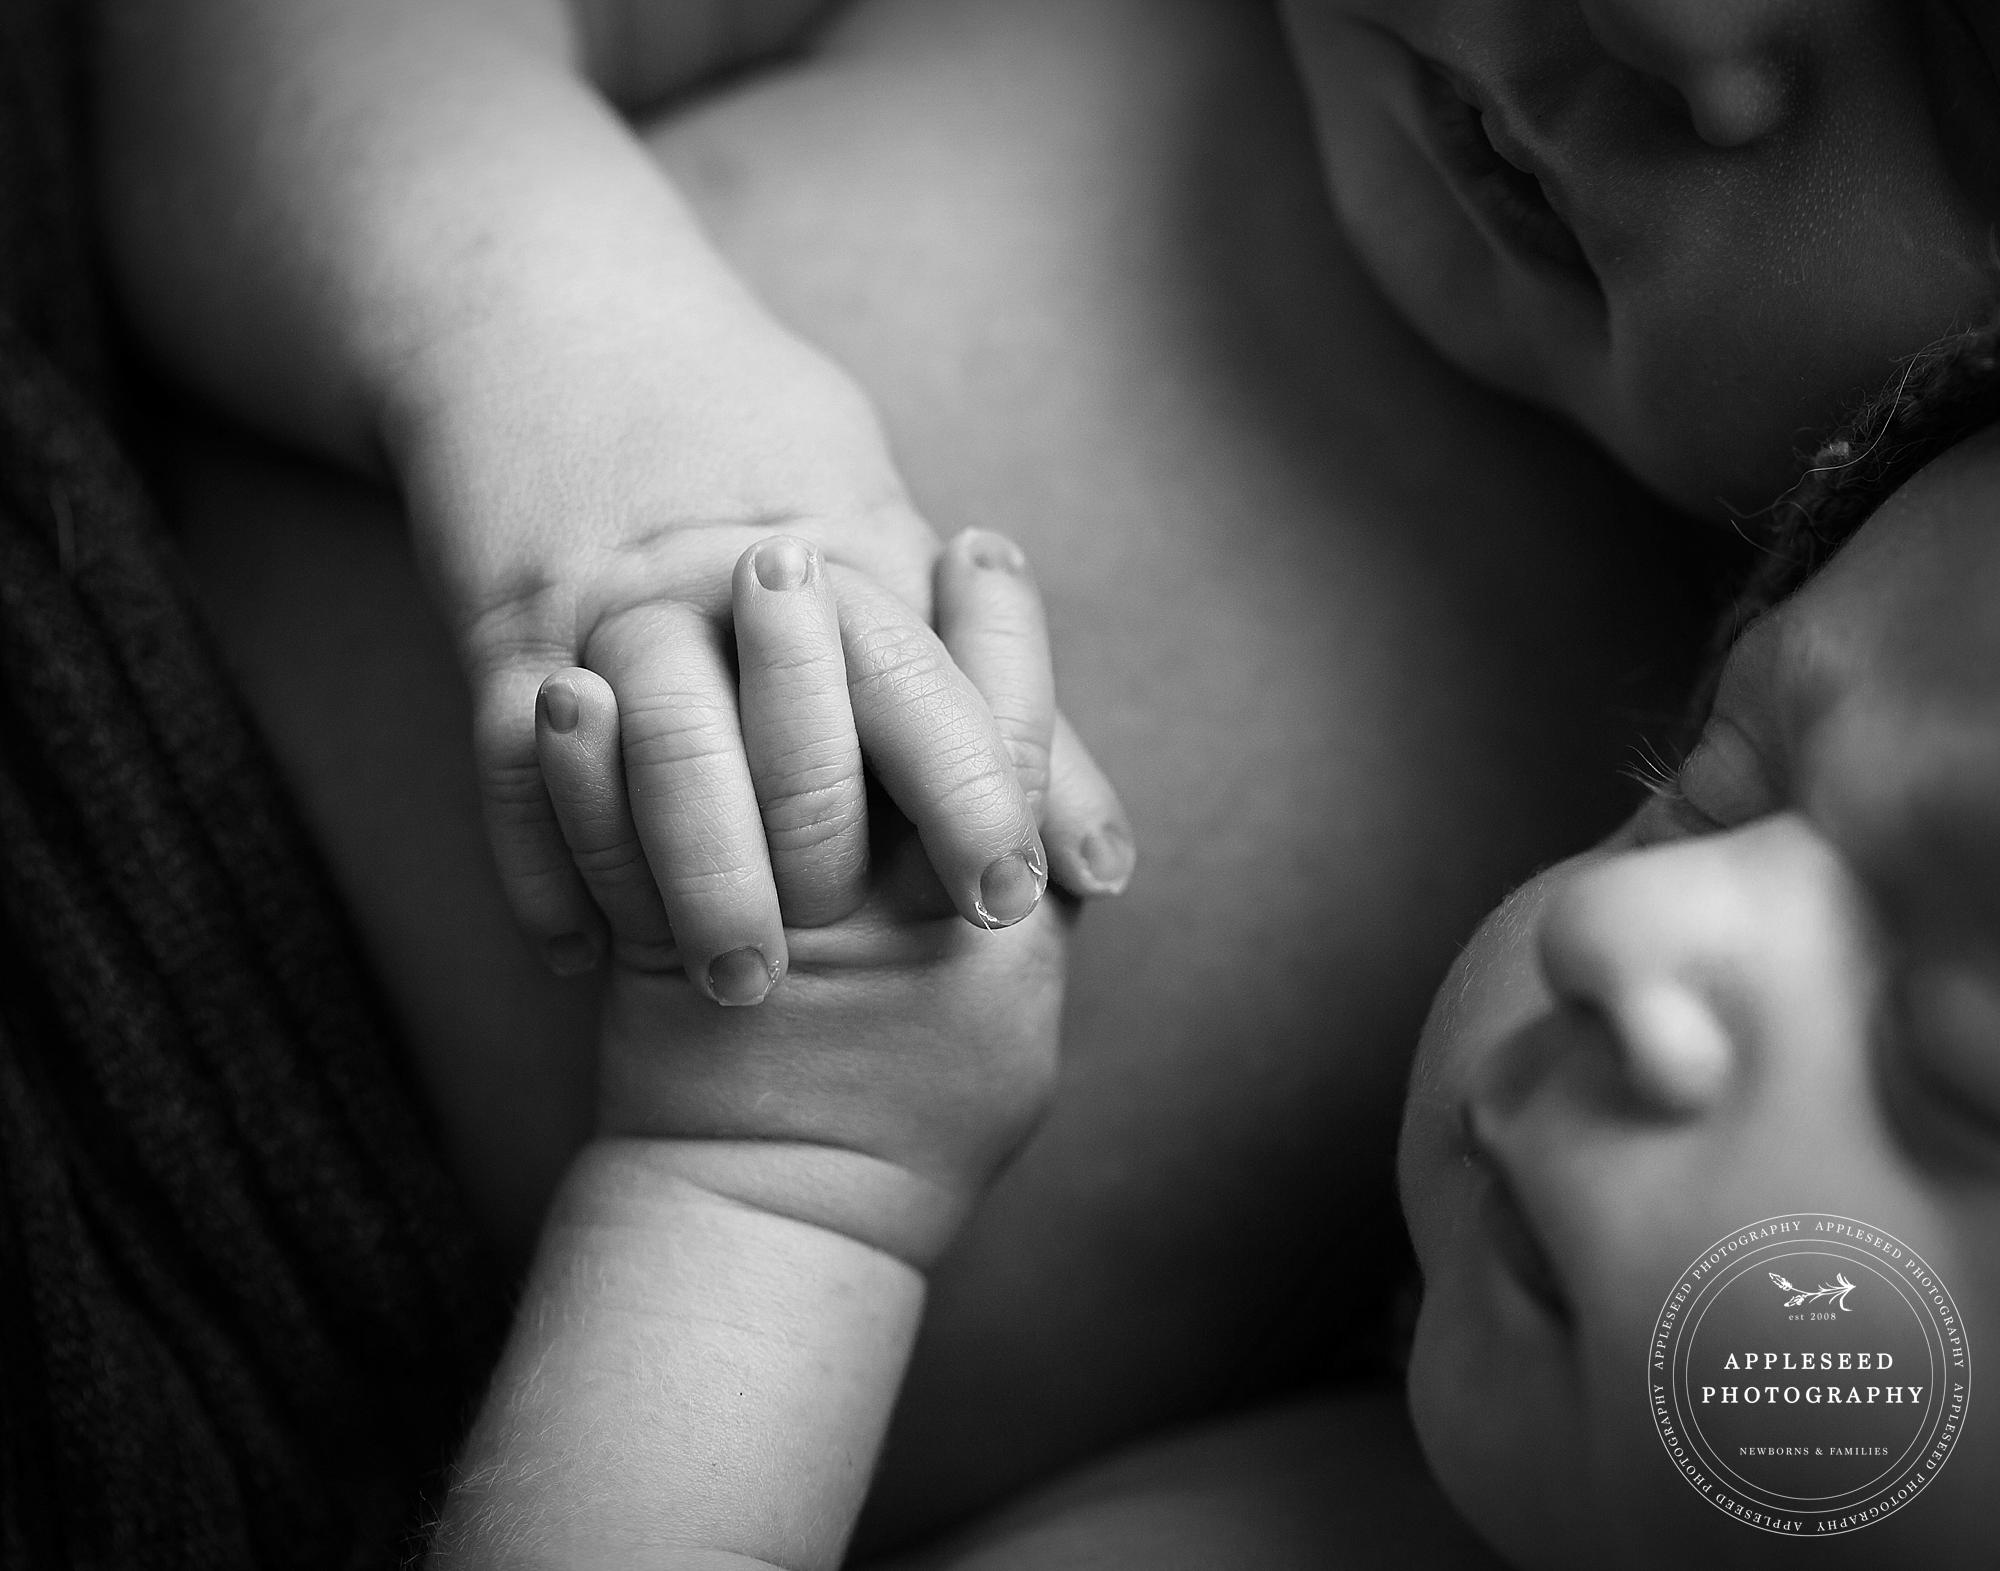 Atlanta Multiples Photographer | Twin Brothers | Appleseed Photography